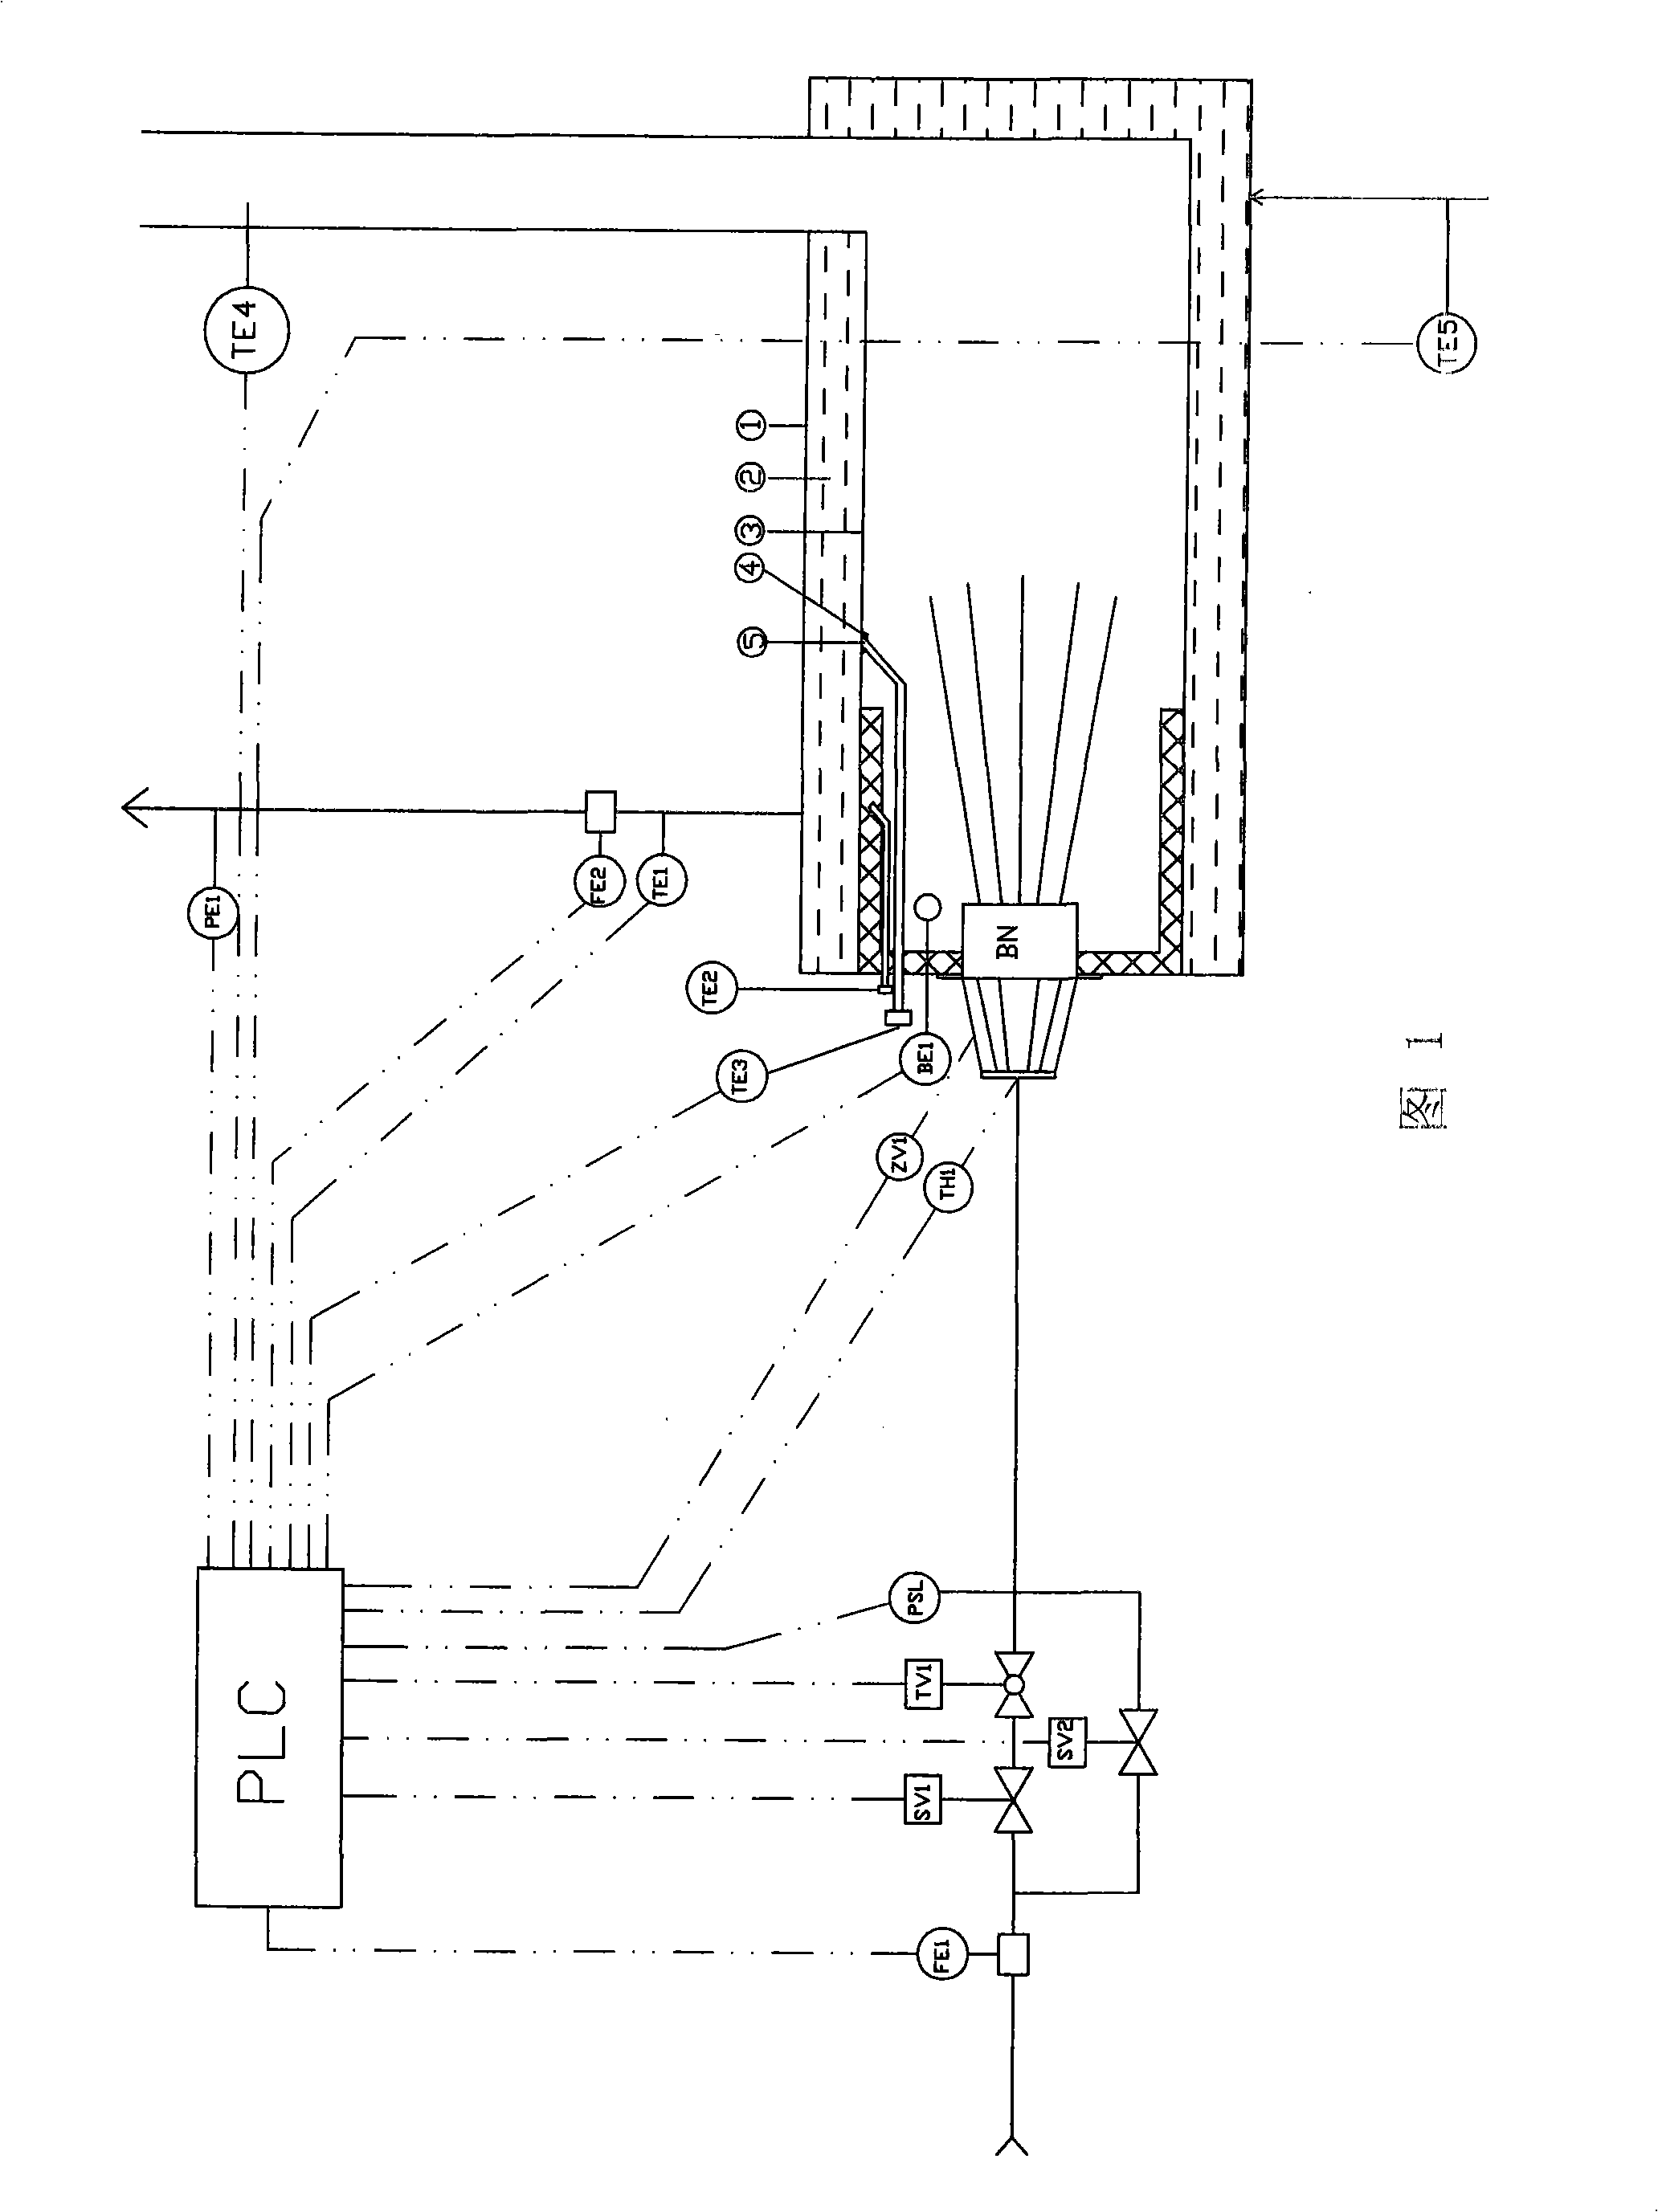 Full-automatic control system of oil field heating furnace